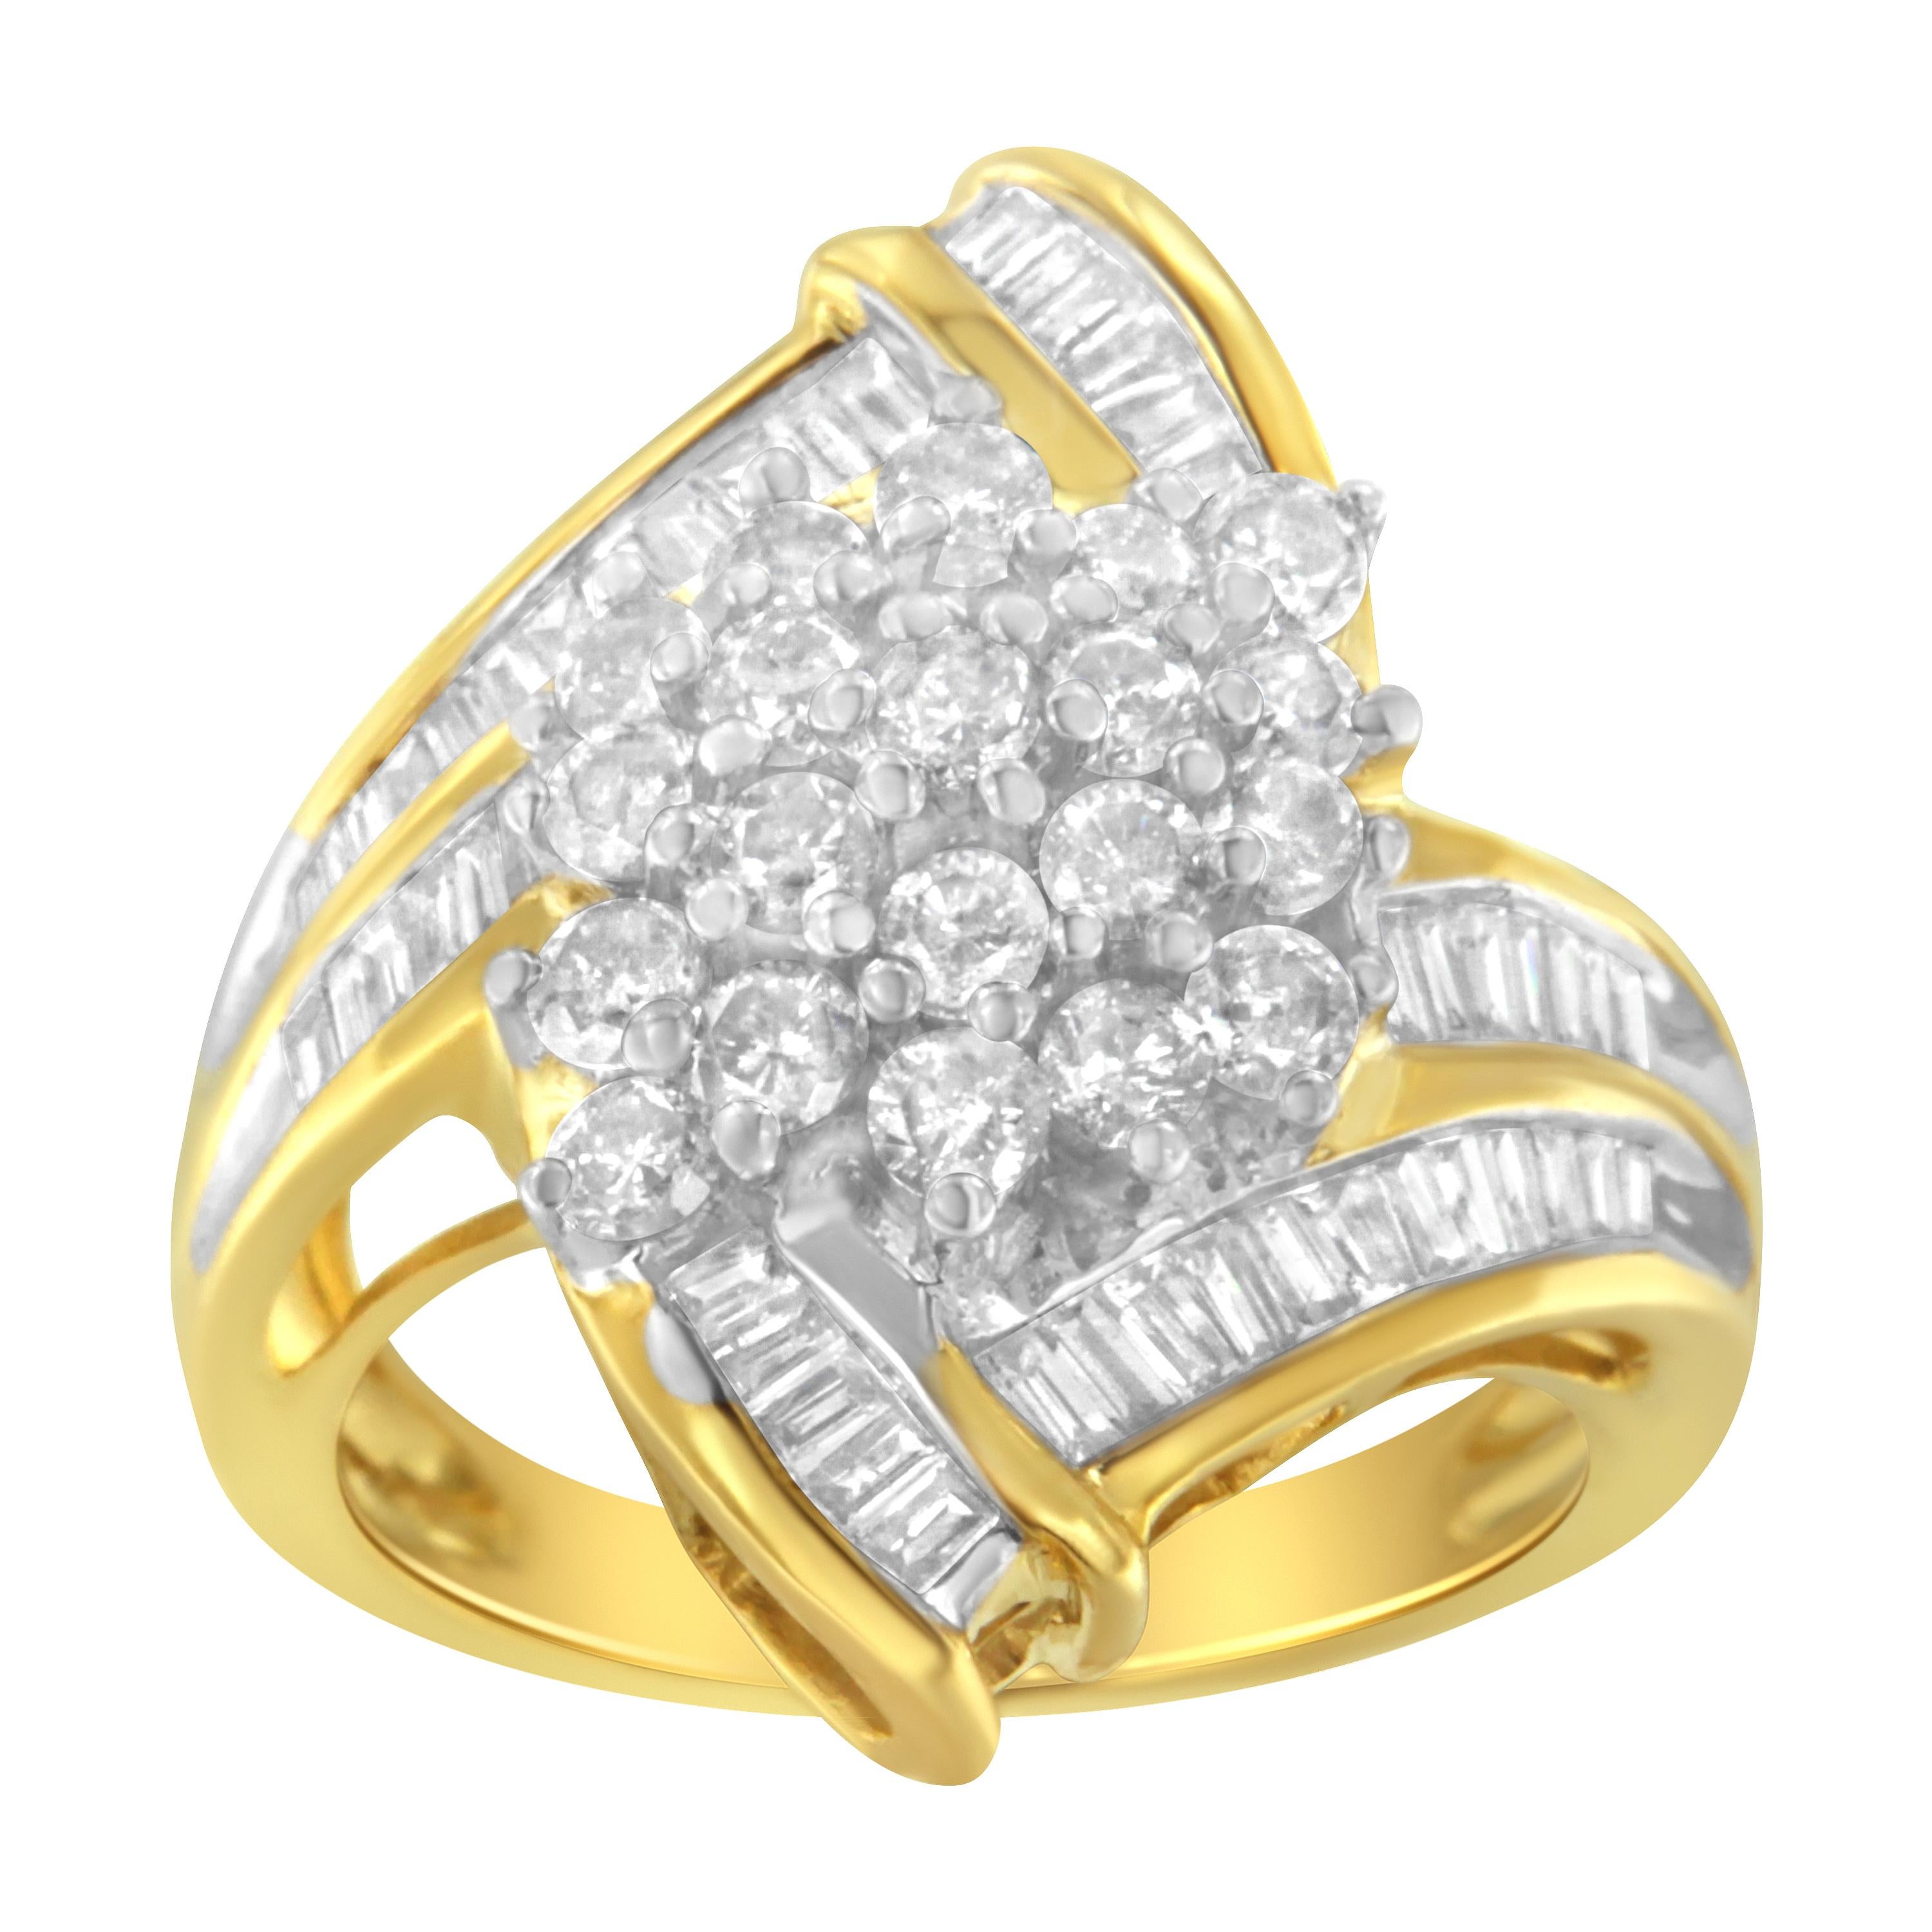 10K Yellow Gold 2.00 Carat Round and Baguette Diamond Swirl Ring For Sale